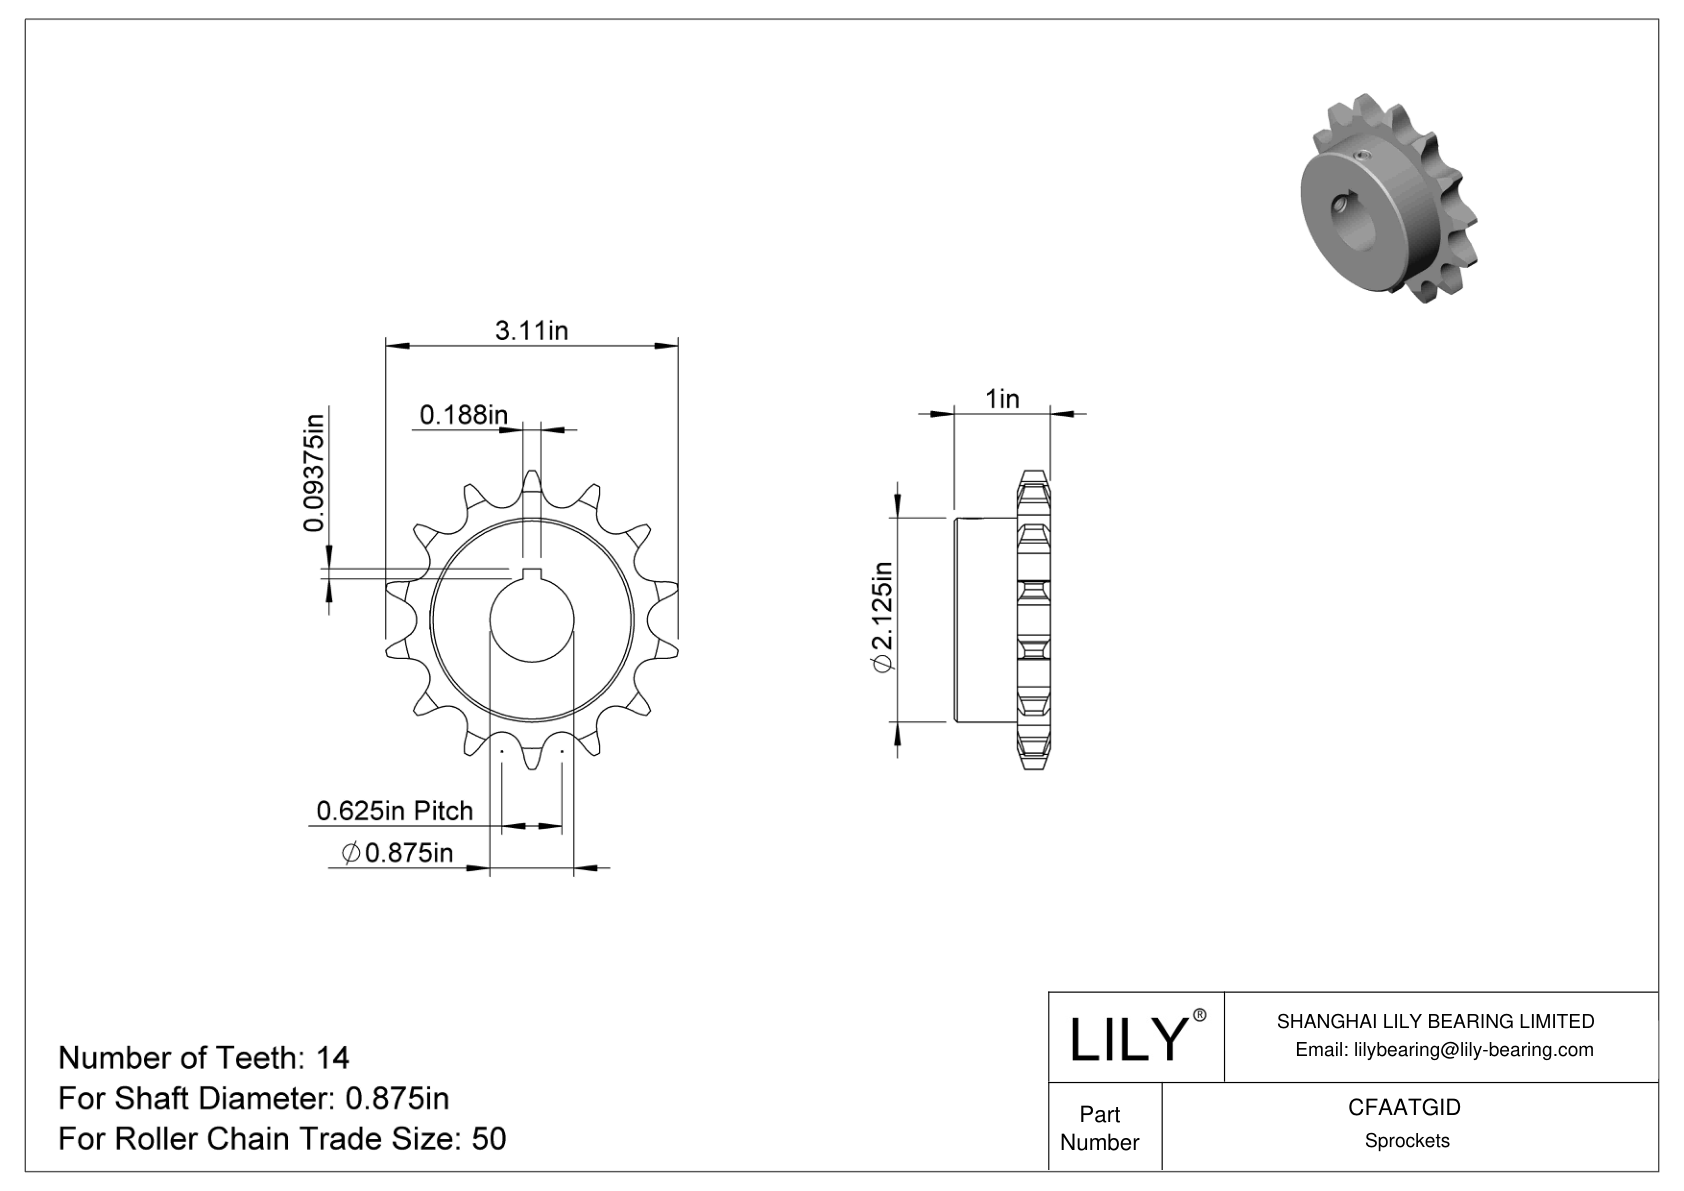 CFAATGID Wear-Resistant Sprockets for ANSI Roller Chain cad drawing